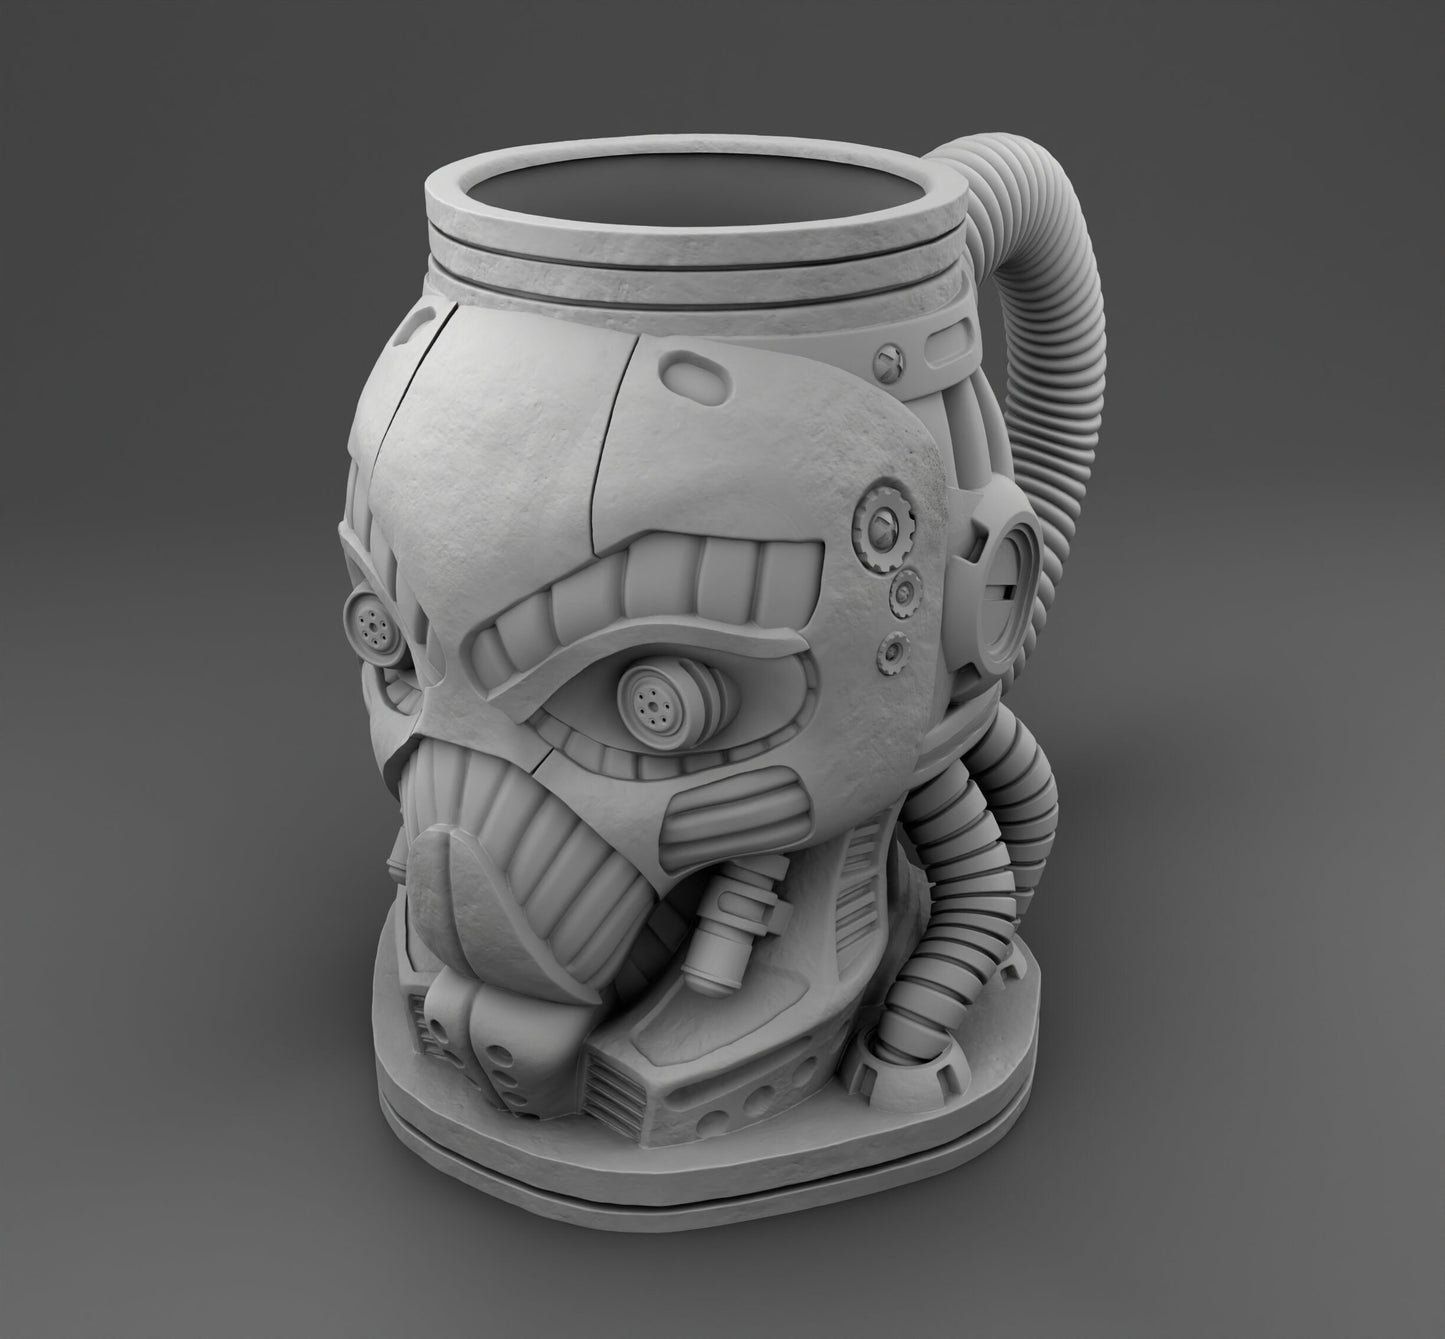 Robot Cup 2.0 Dice Mug by 3DFortress